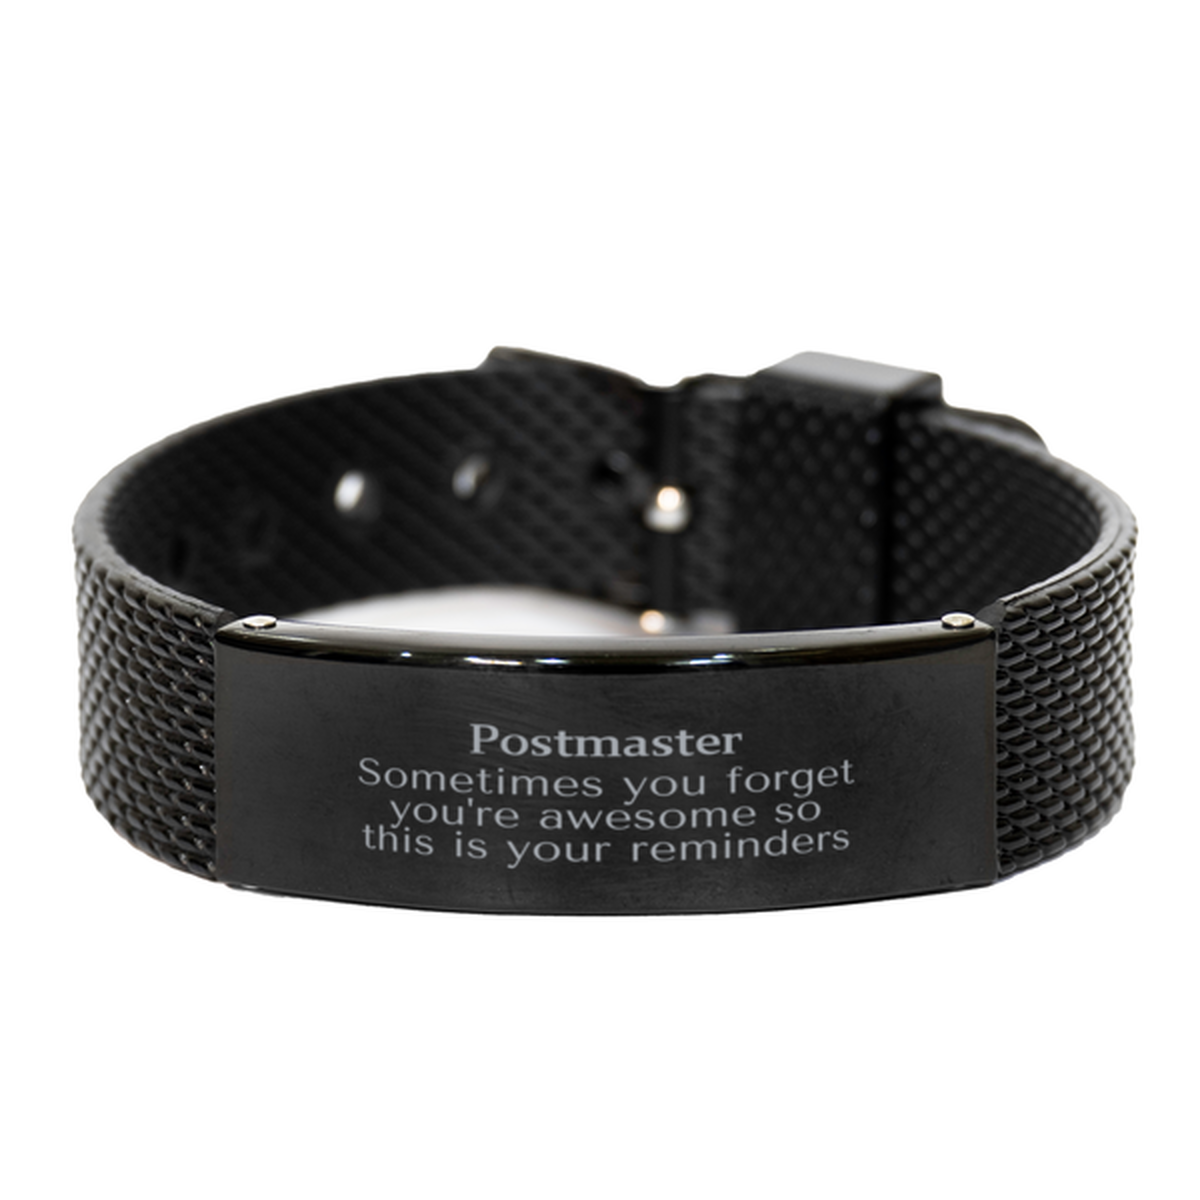 Sentimental Postmaster Black Shark Mesh Bracelet, Postmaster Sometimes you forget you're awesome so this is your reminders, Graduation Christmas Birthday Gifts for Postmaster, Men, Women, Coworkers